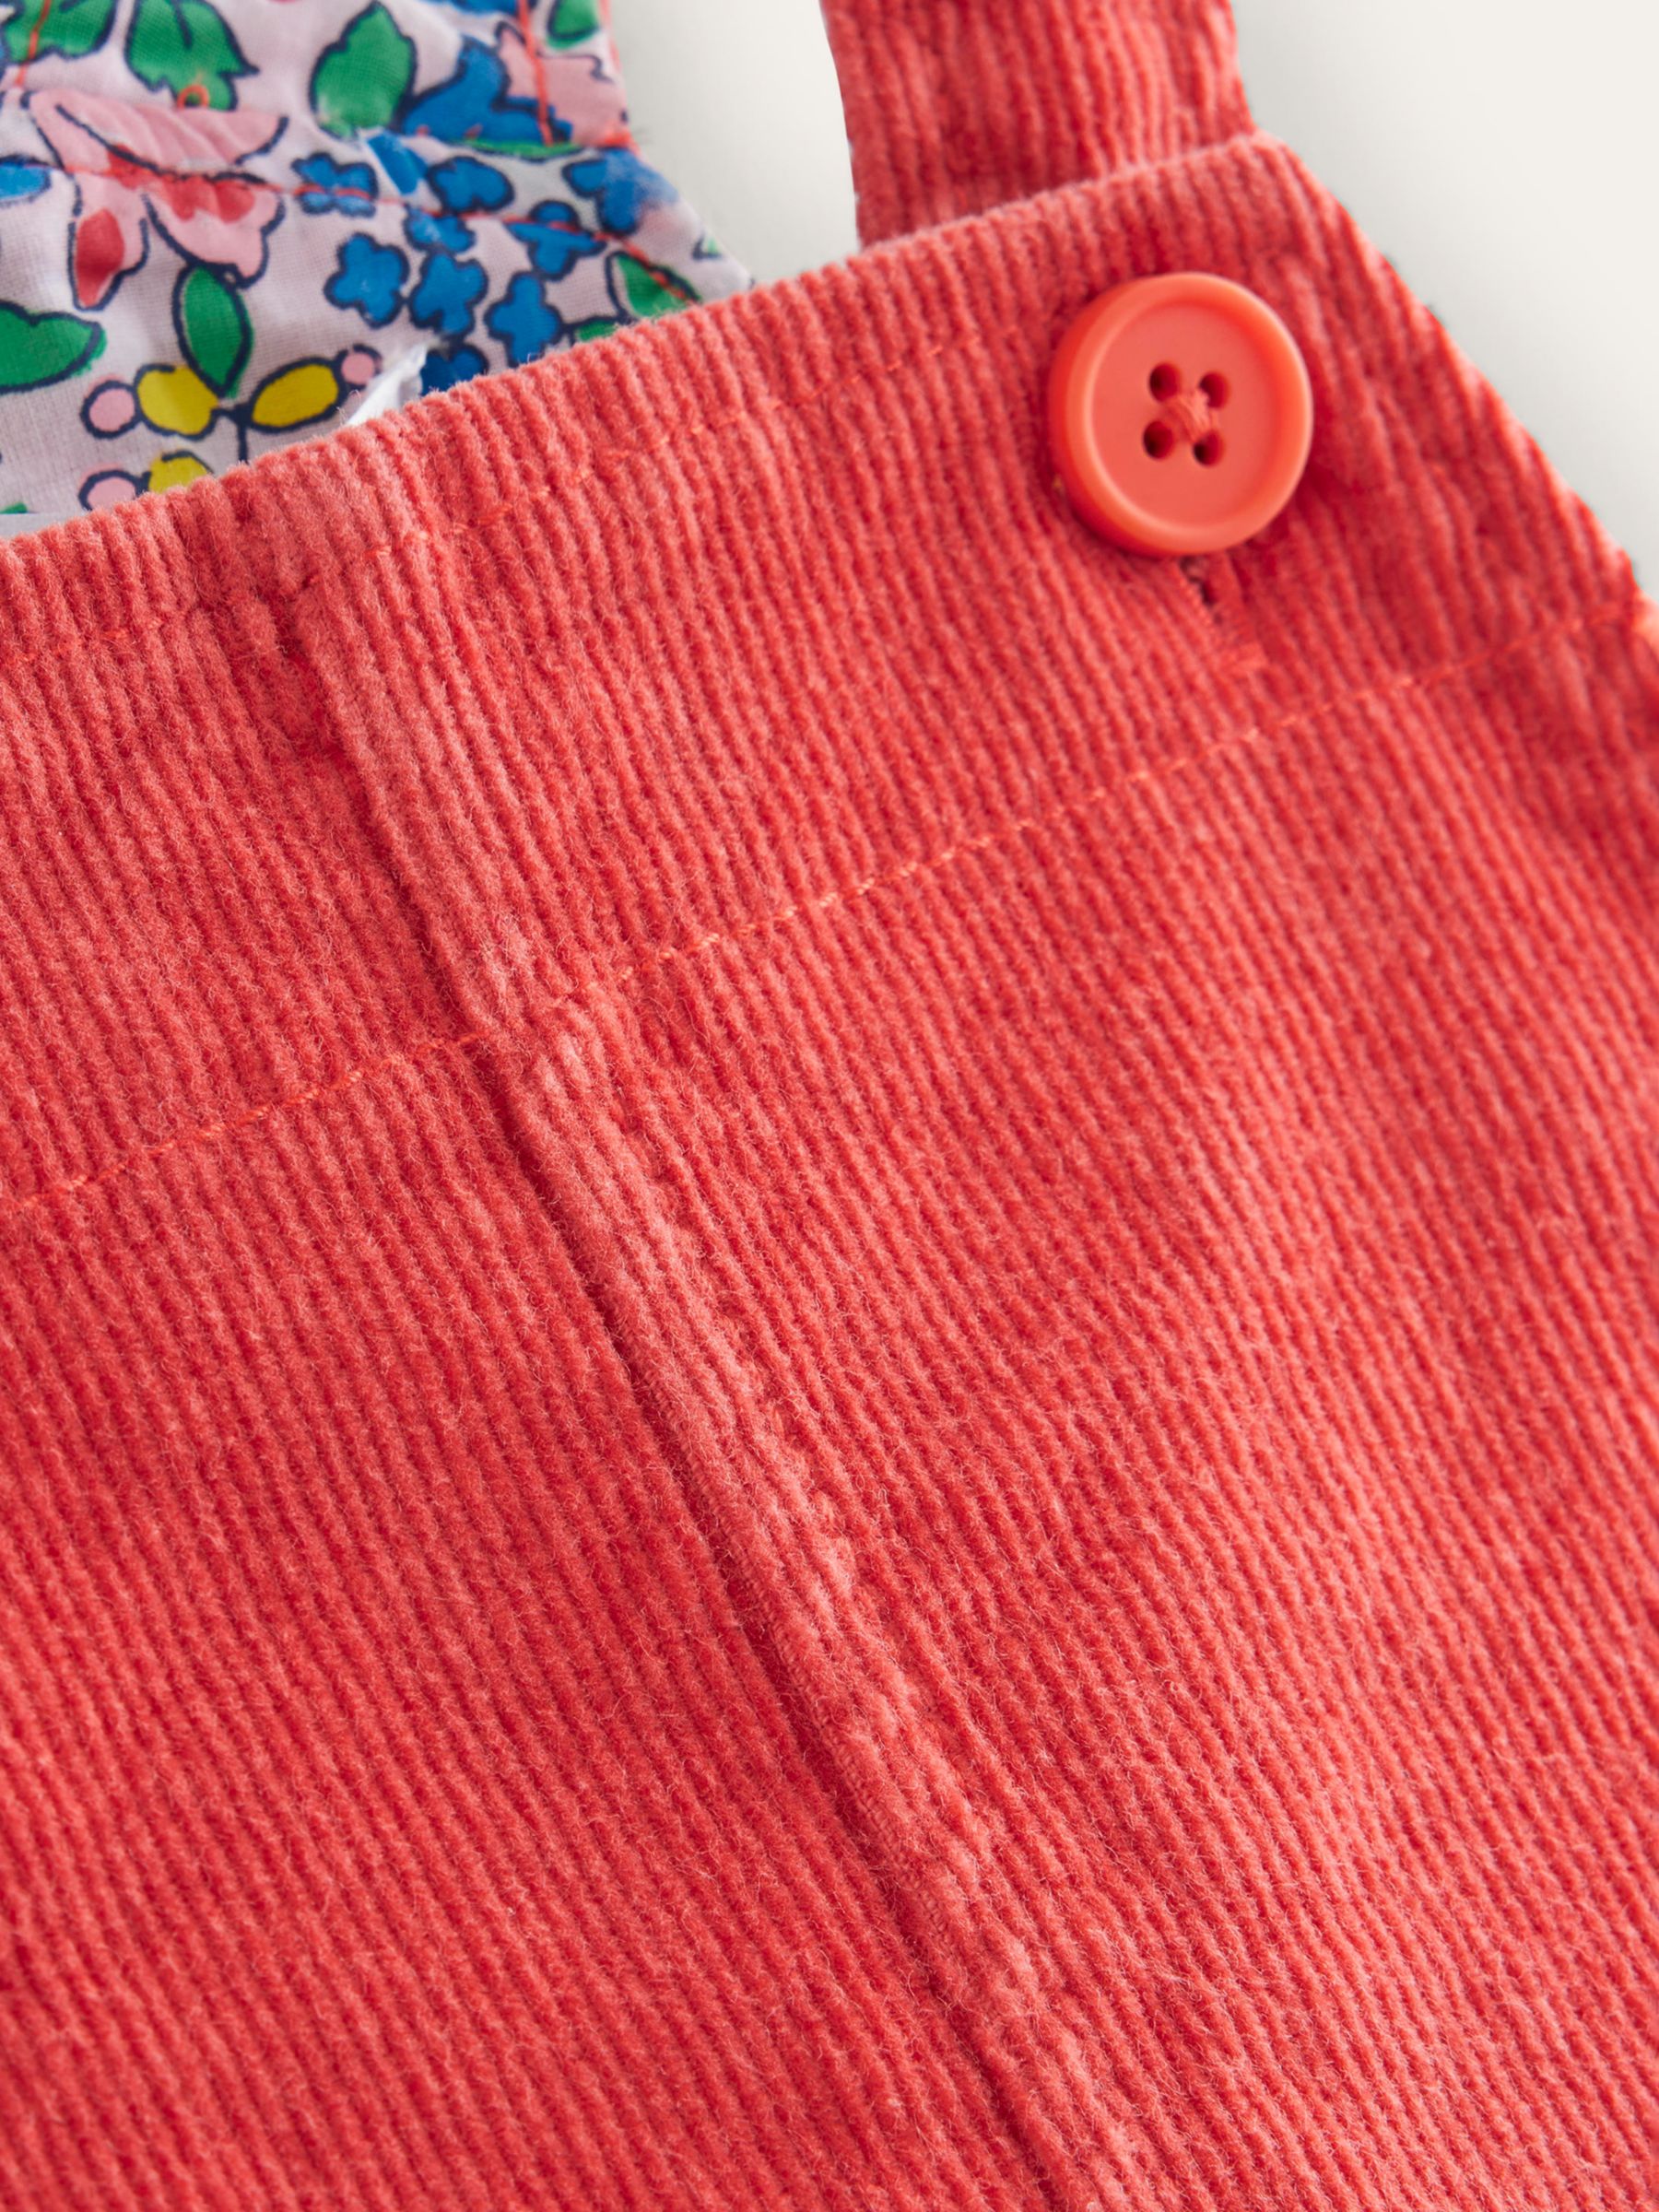 Buy Mini Boden Kids' Relaxed Cord Dungaree Dress, Coral Pink Online at johnlewis.com